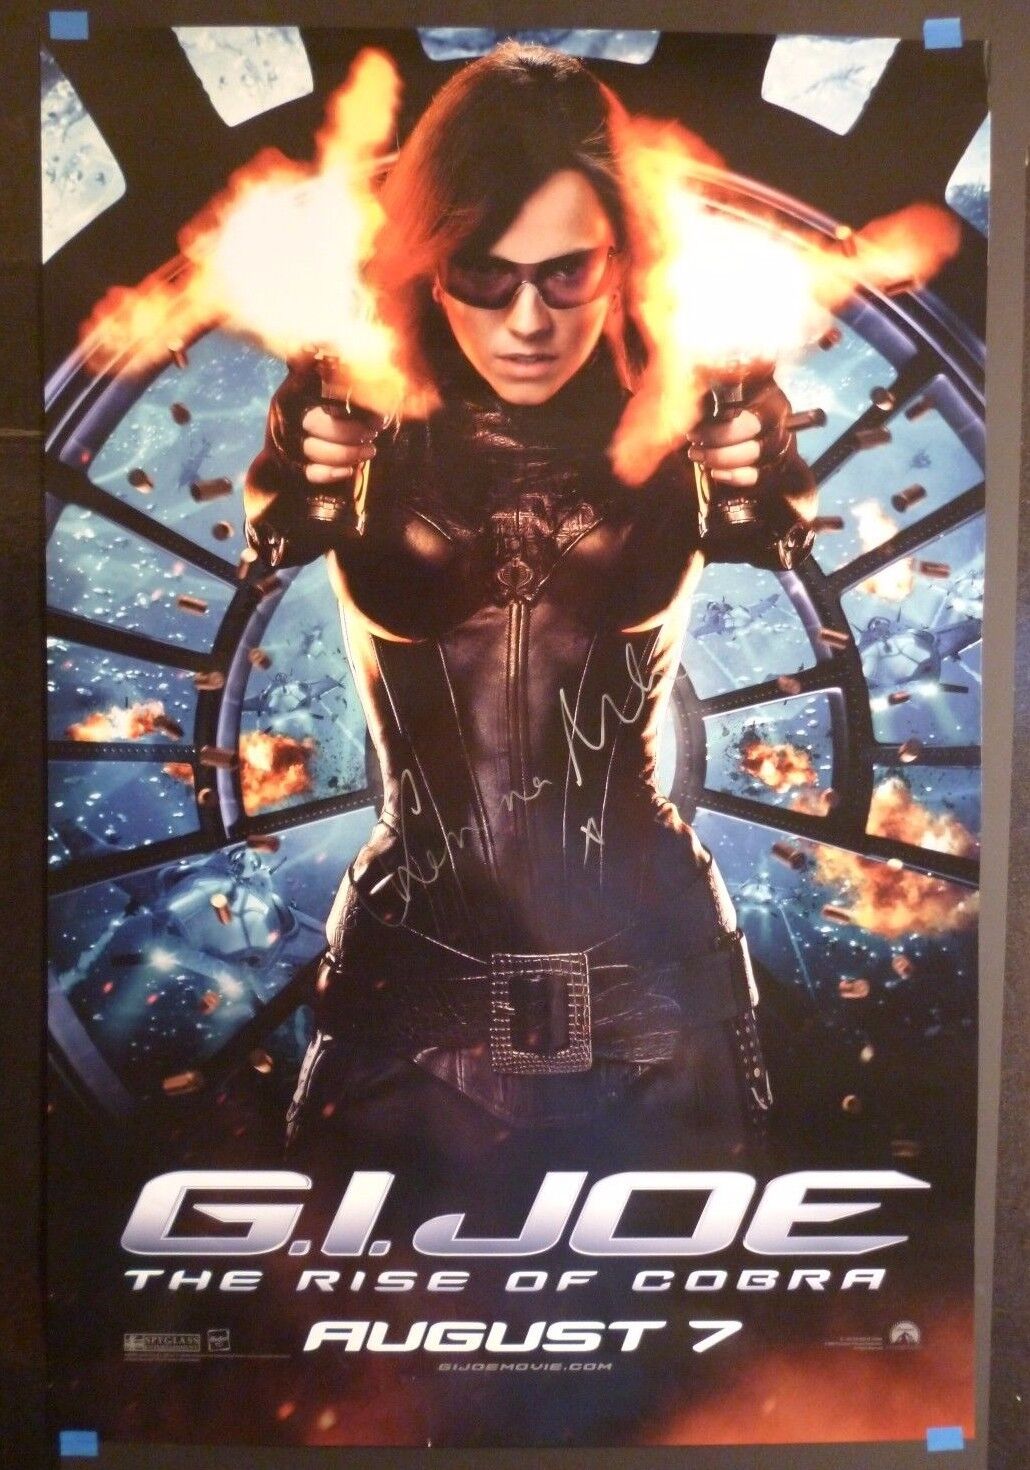 SIENNA MILLER Authentic Hand-Signed Original G.I.JOE BARONESS 24x36 Poster